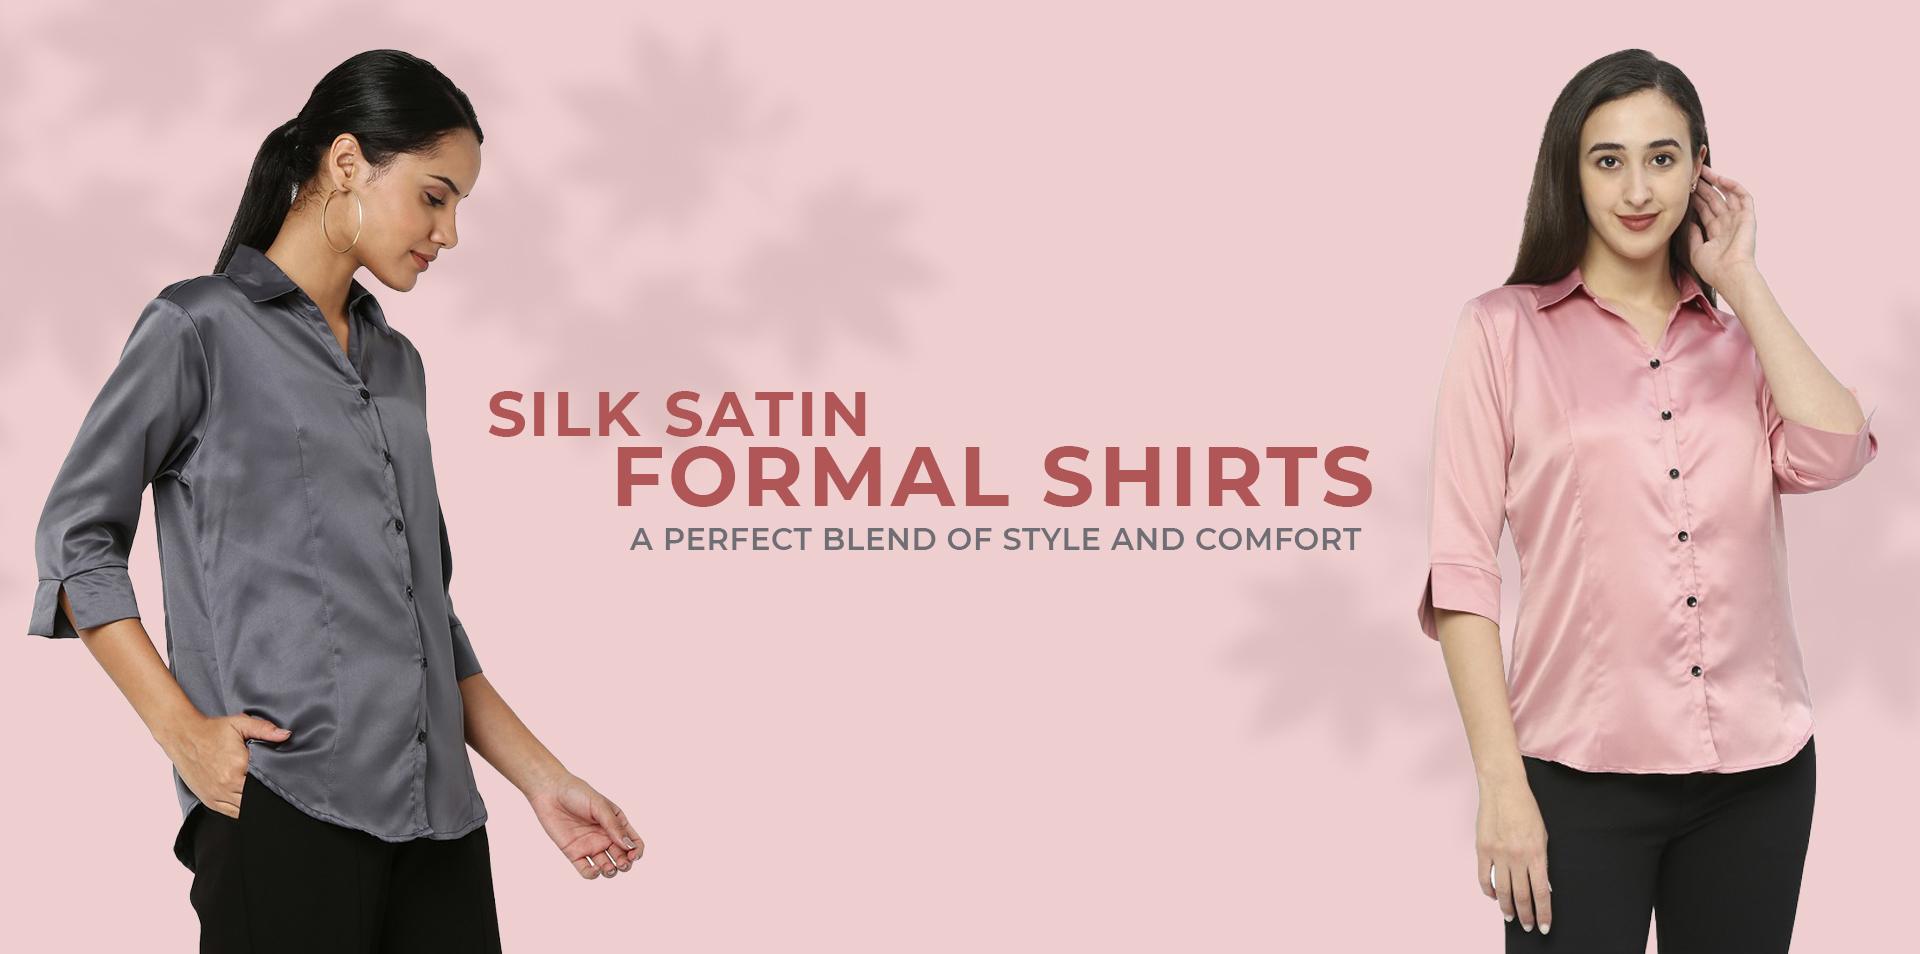 Silk Satin Formal Shirts - A Perfect Blend of Style and Comfort